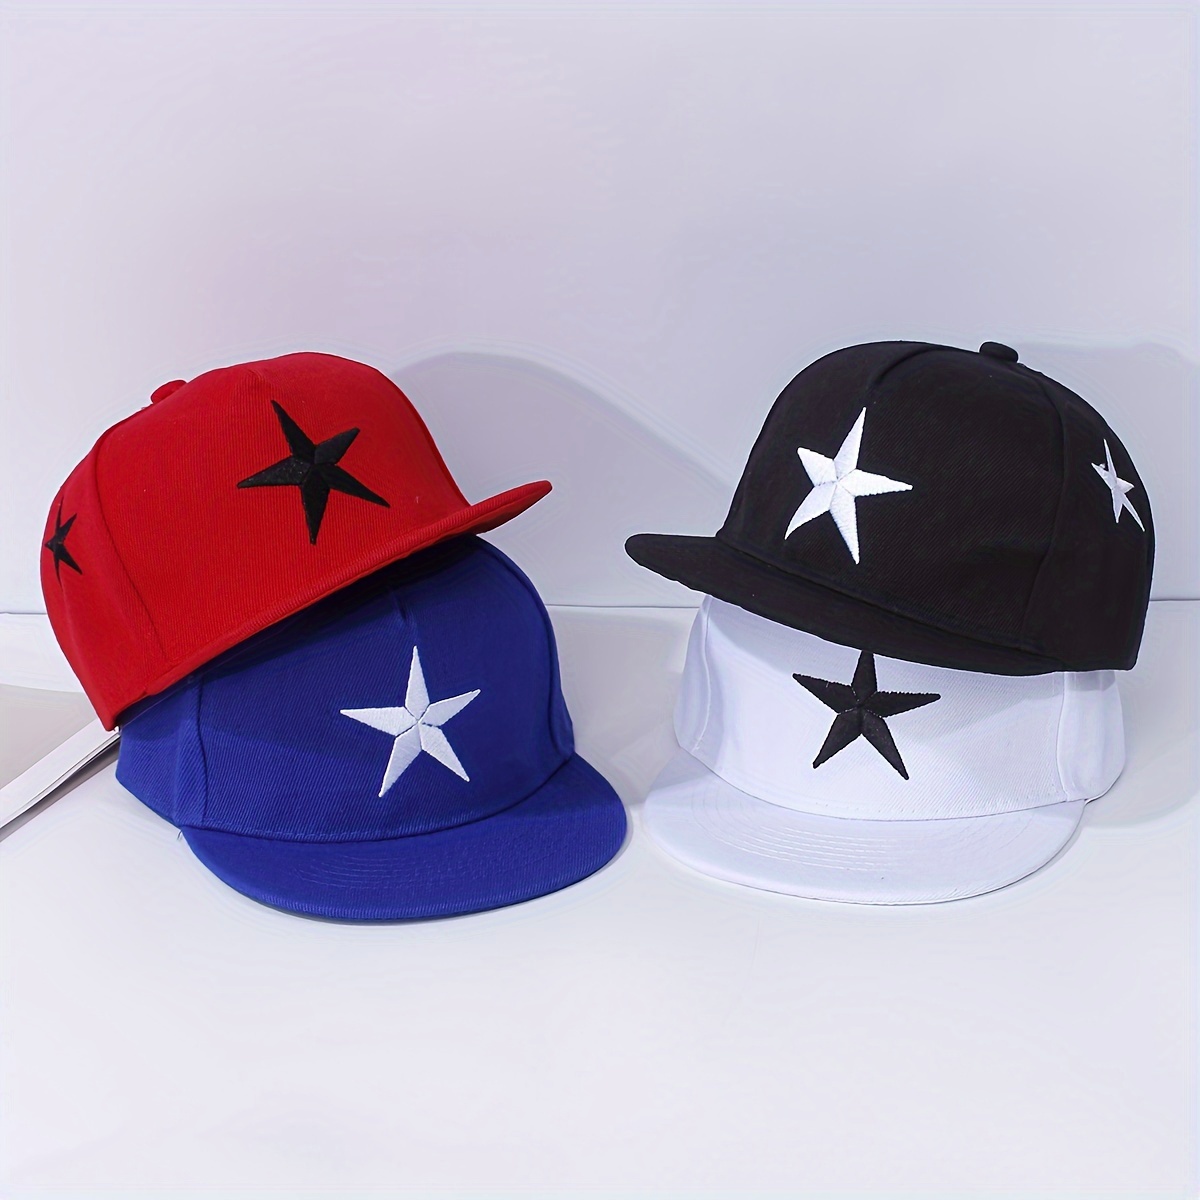 

1pc Kids Summer Uv Protection Adjustable Baseball Cap With Star Design, Flat Brim Hip-hop Style Lightweight Snapback Hat, For Daily Wear, Fits 5-8 Years